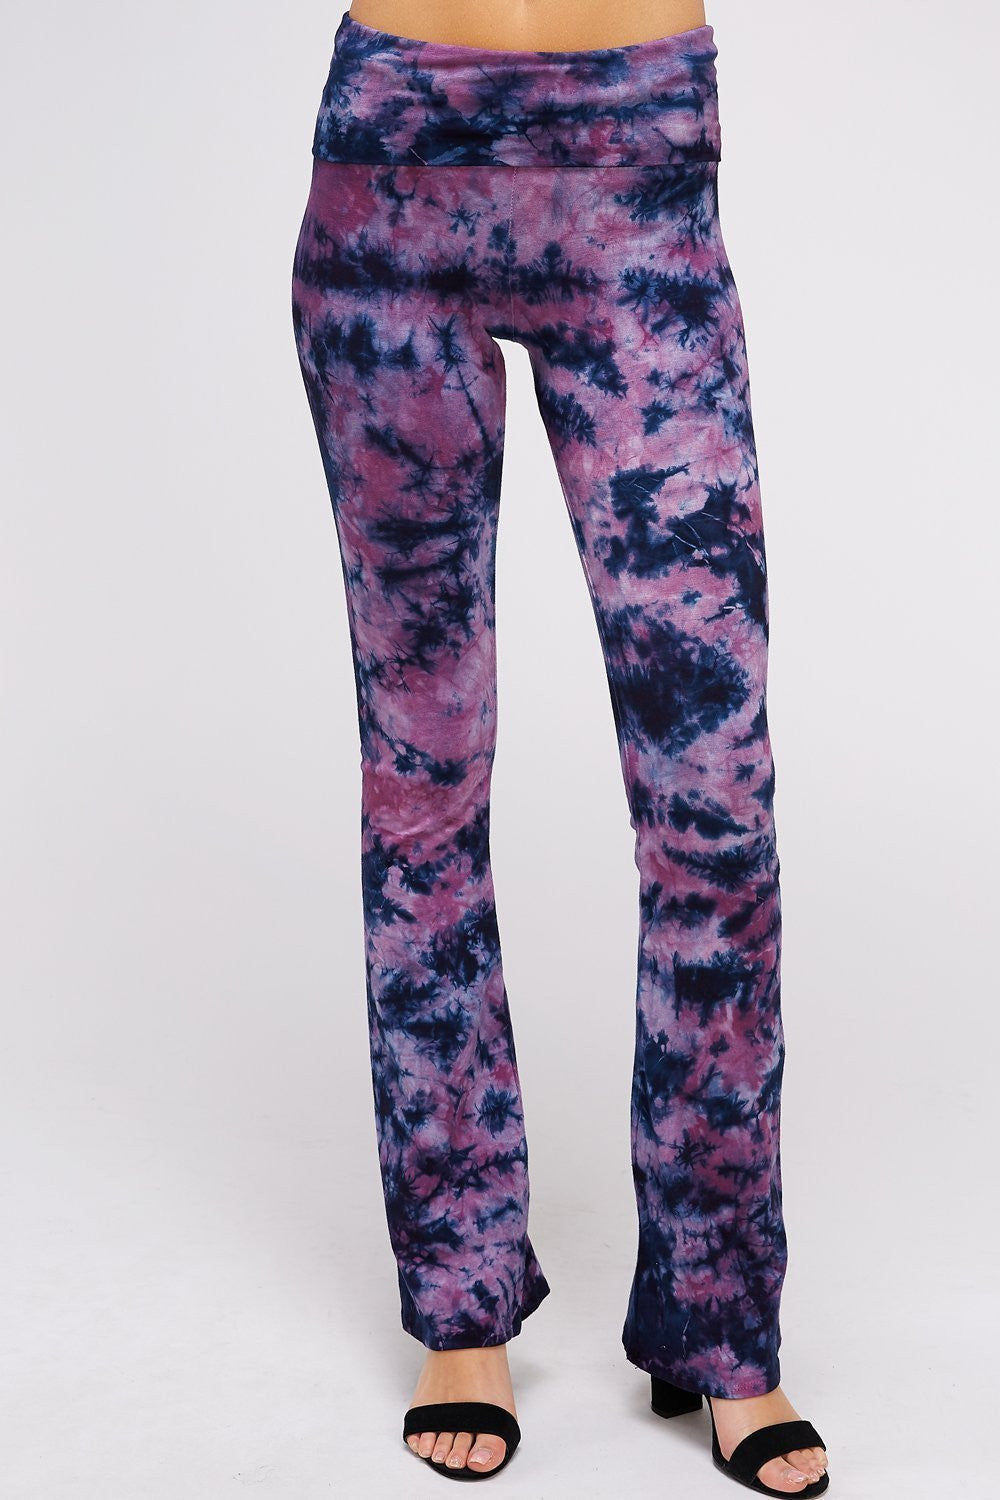 Navy & Purple Bamboo Tie dye Straight Leg Yoga Pant with Banded waist